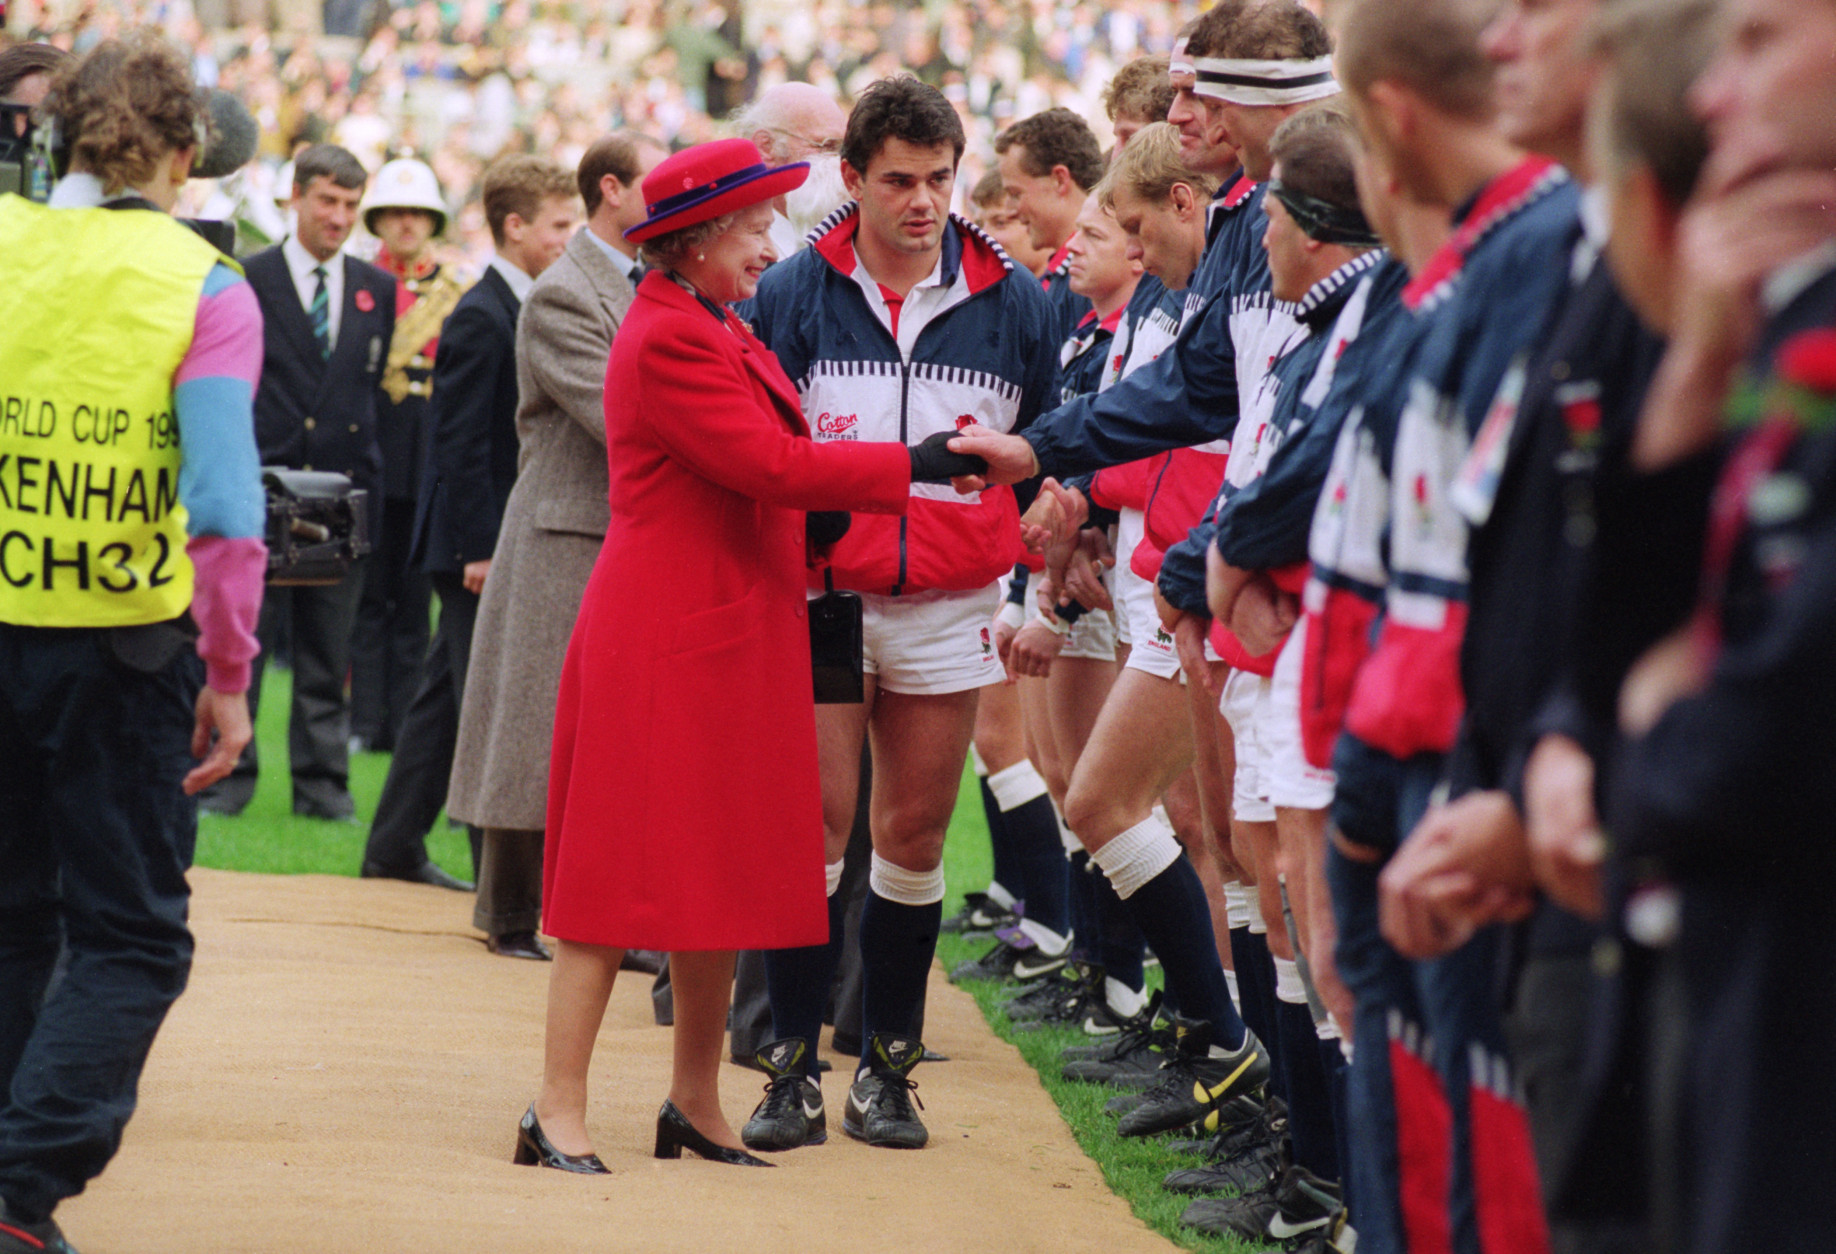 England captain Will Carling introduces Queen Elizabeth to the England team before the Rugby World Cup Final against Australia at Twickenham, 2nd November 1991. Australia won the match 12-6.  (Photo by Russell Cheyne/Getty Images)